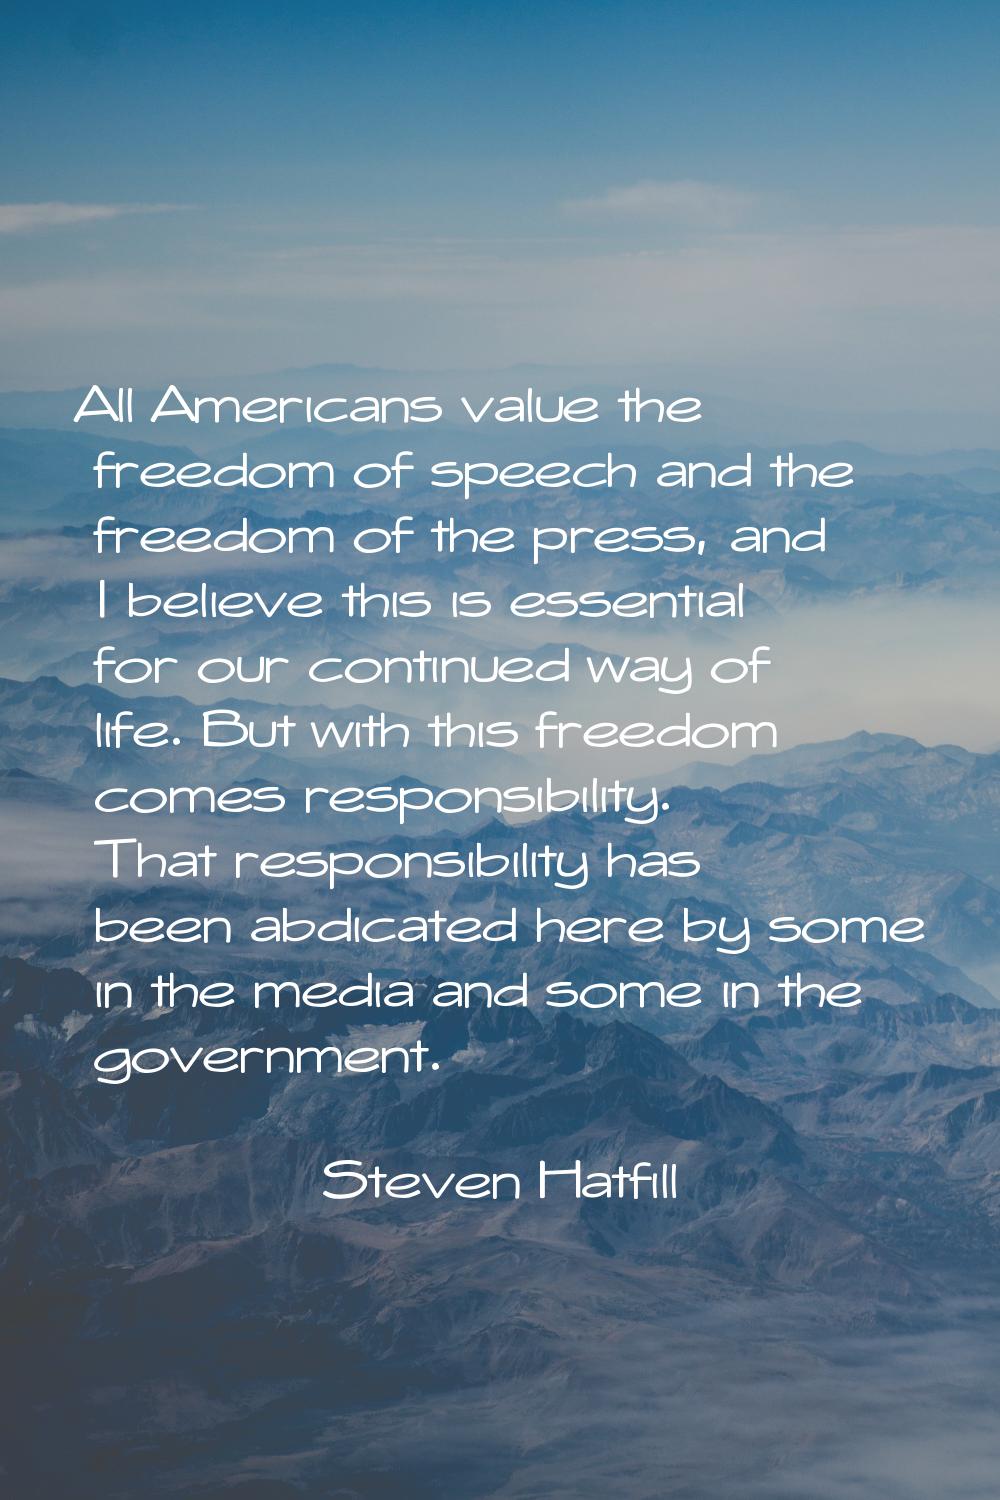 All Americans value the freedom of speech and the freedom of the press, and I believe this is essen